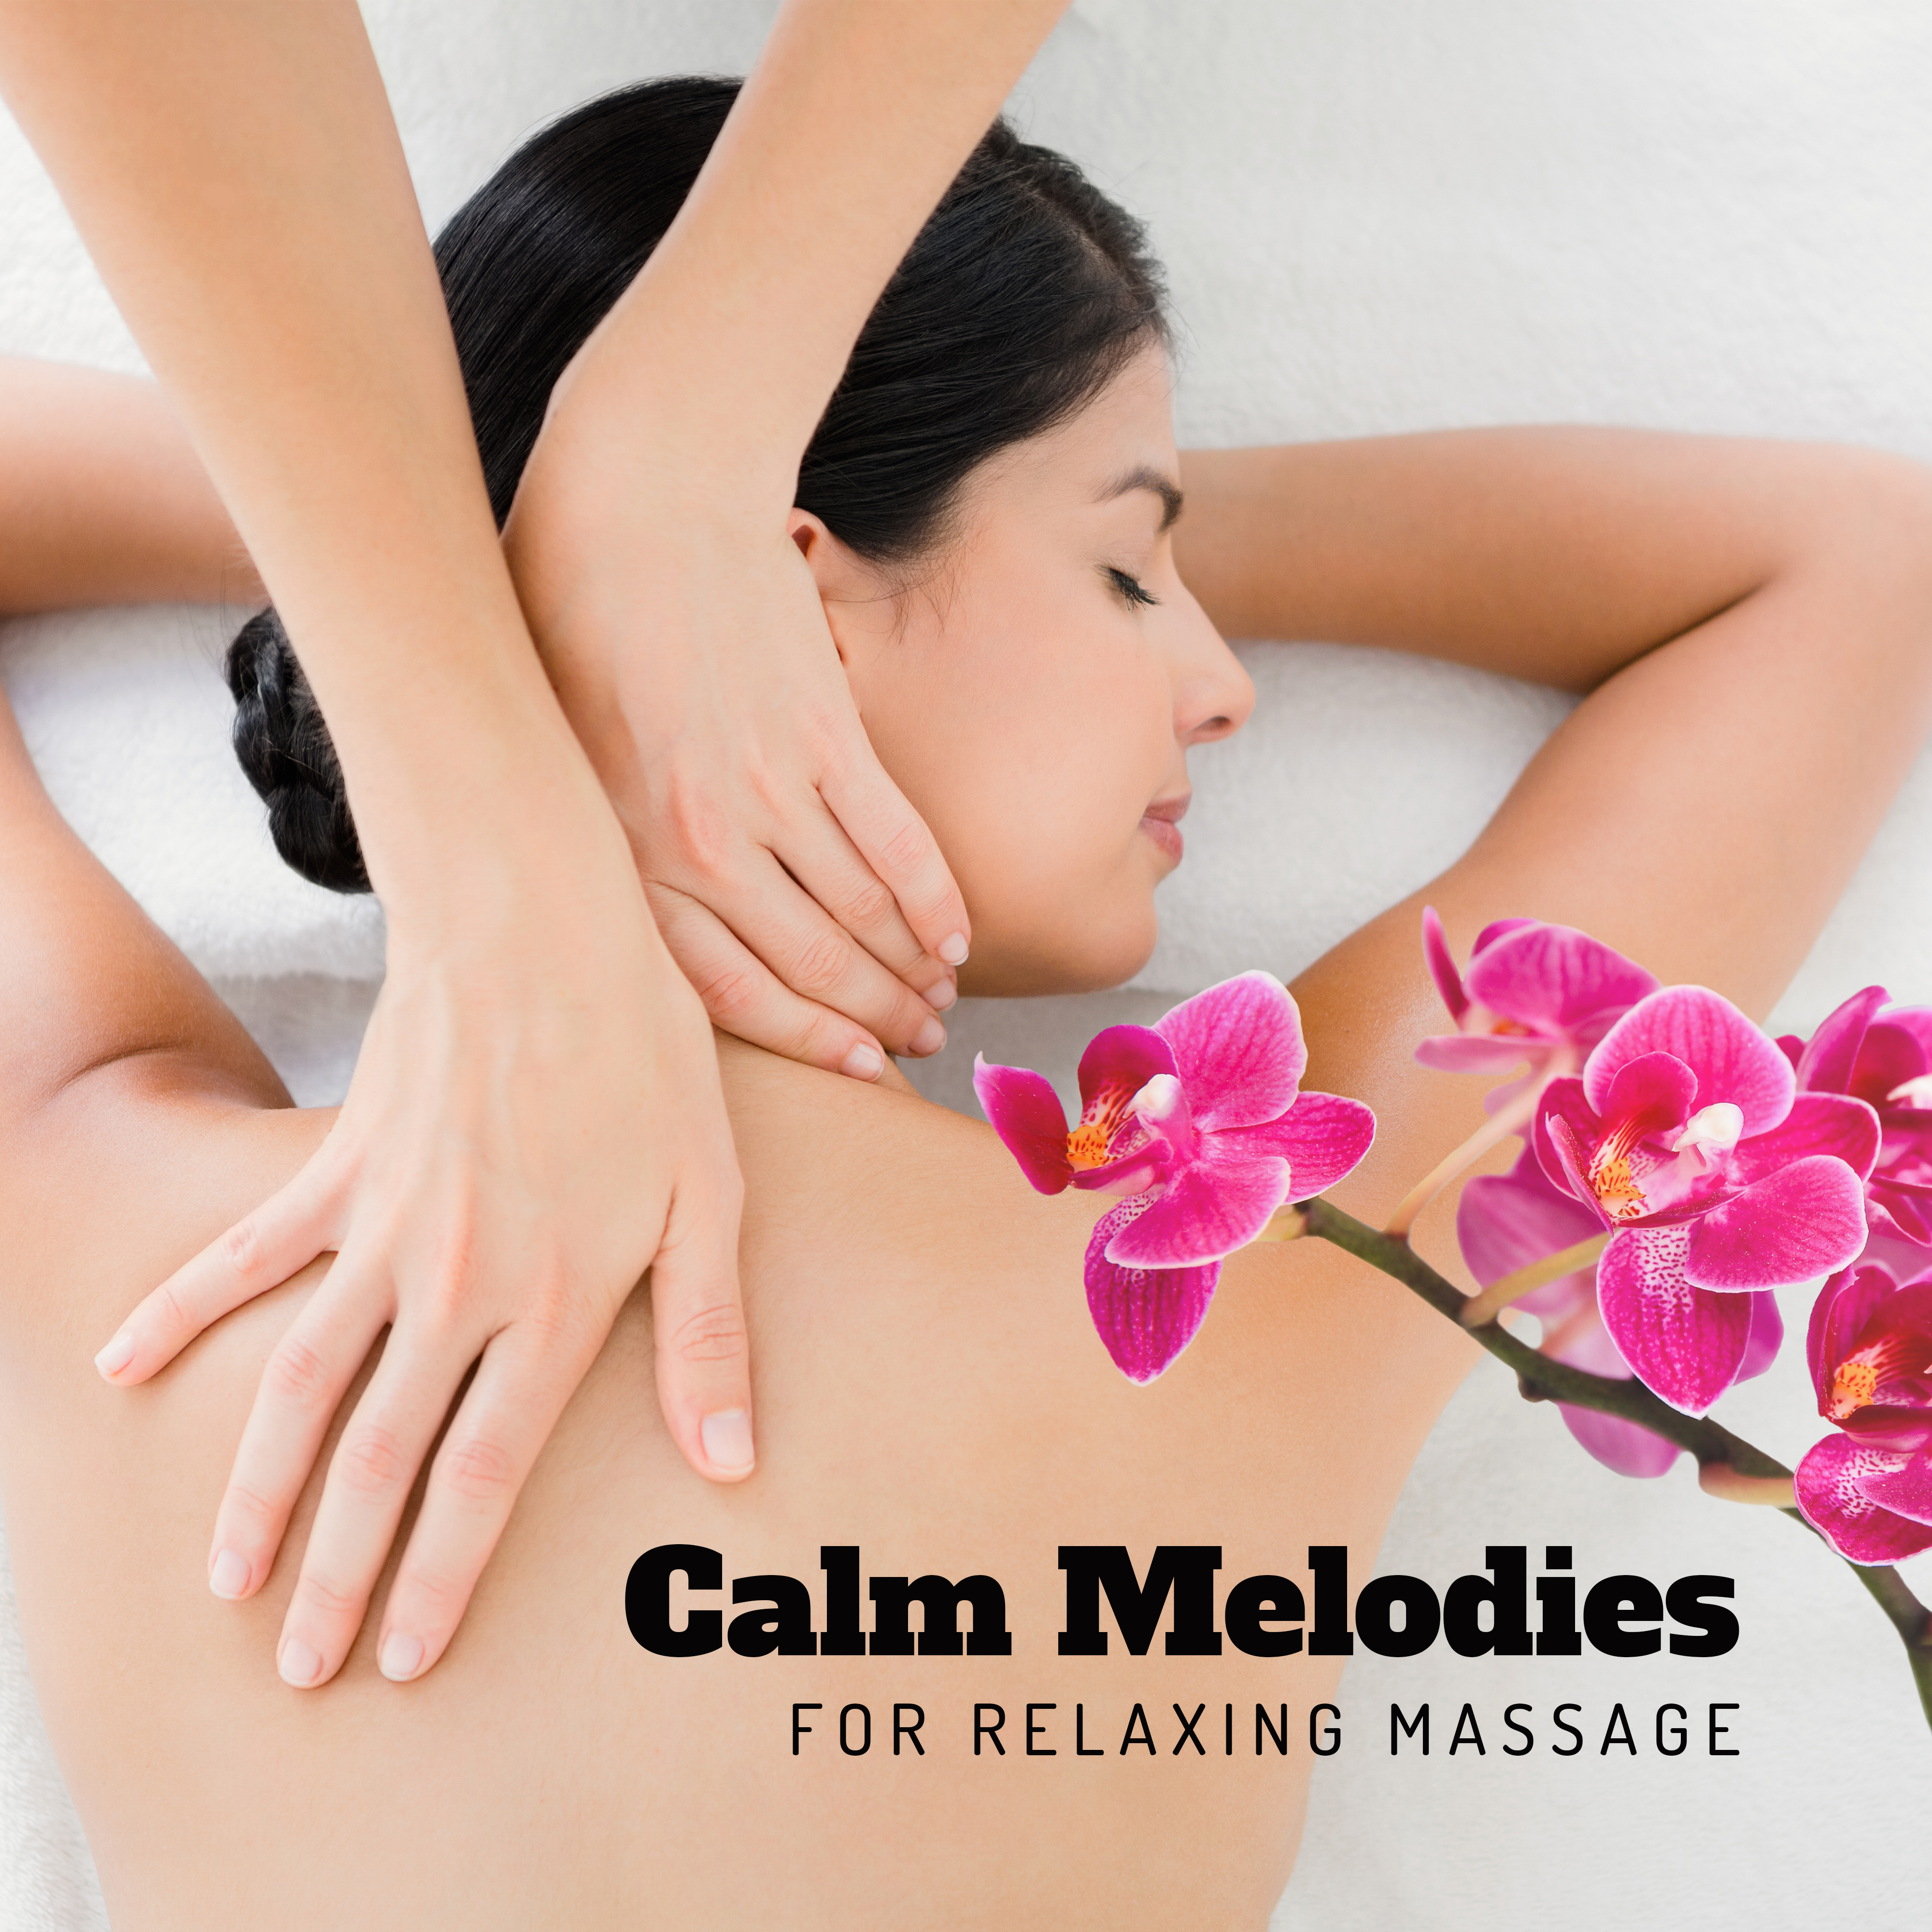 Calm Melodies for Relaxing Massage